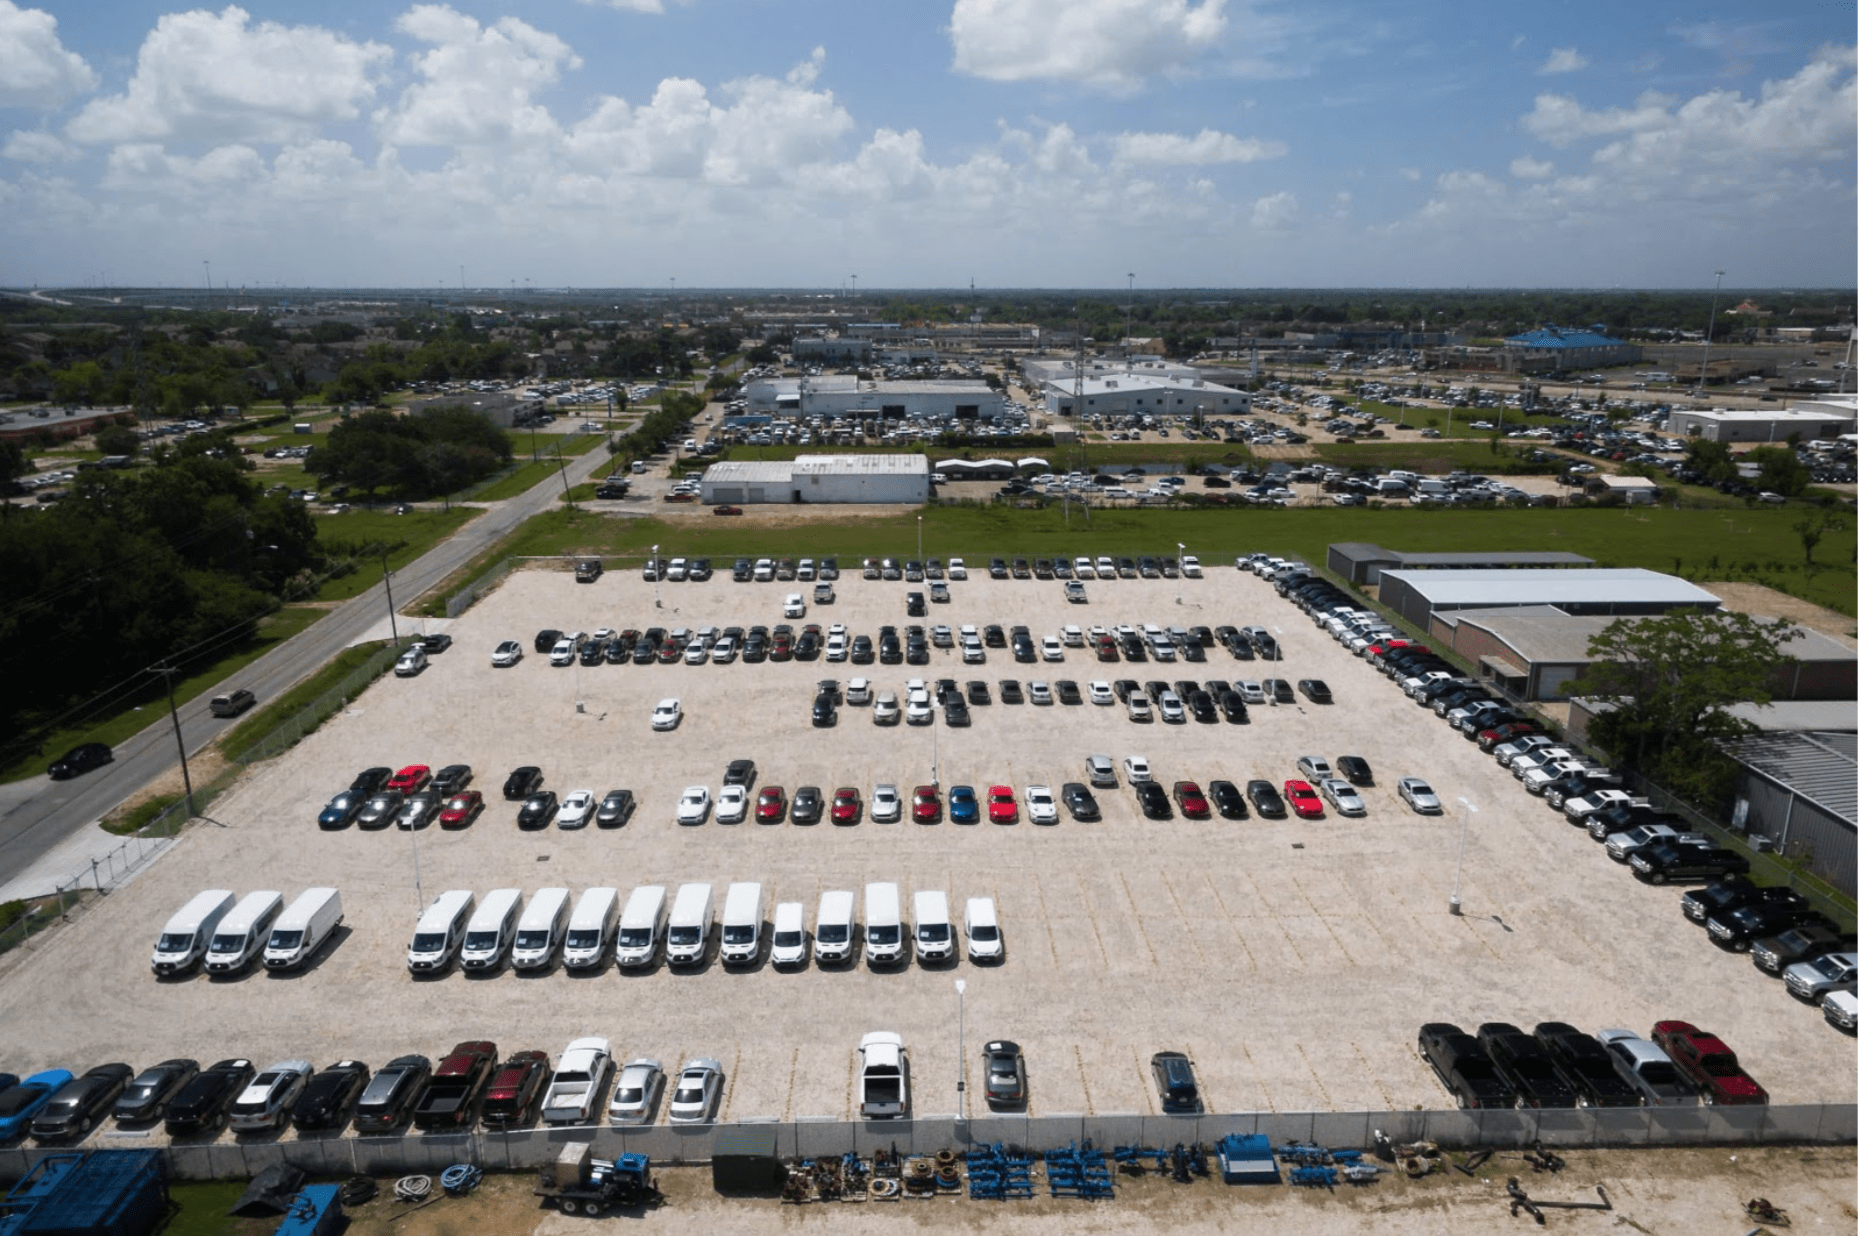 Commercial Parking Lots